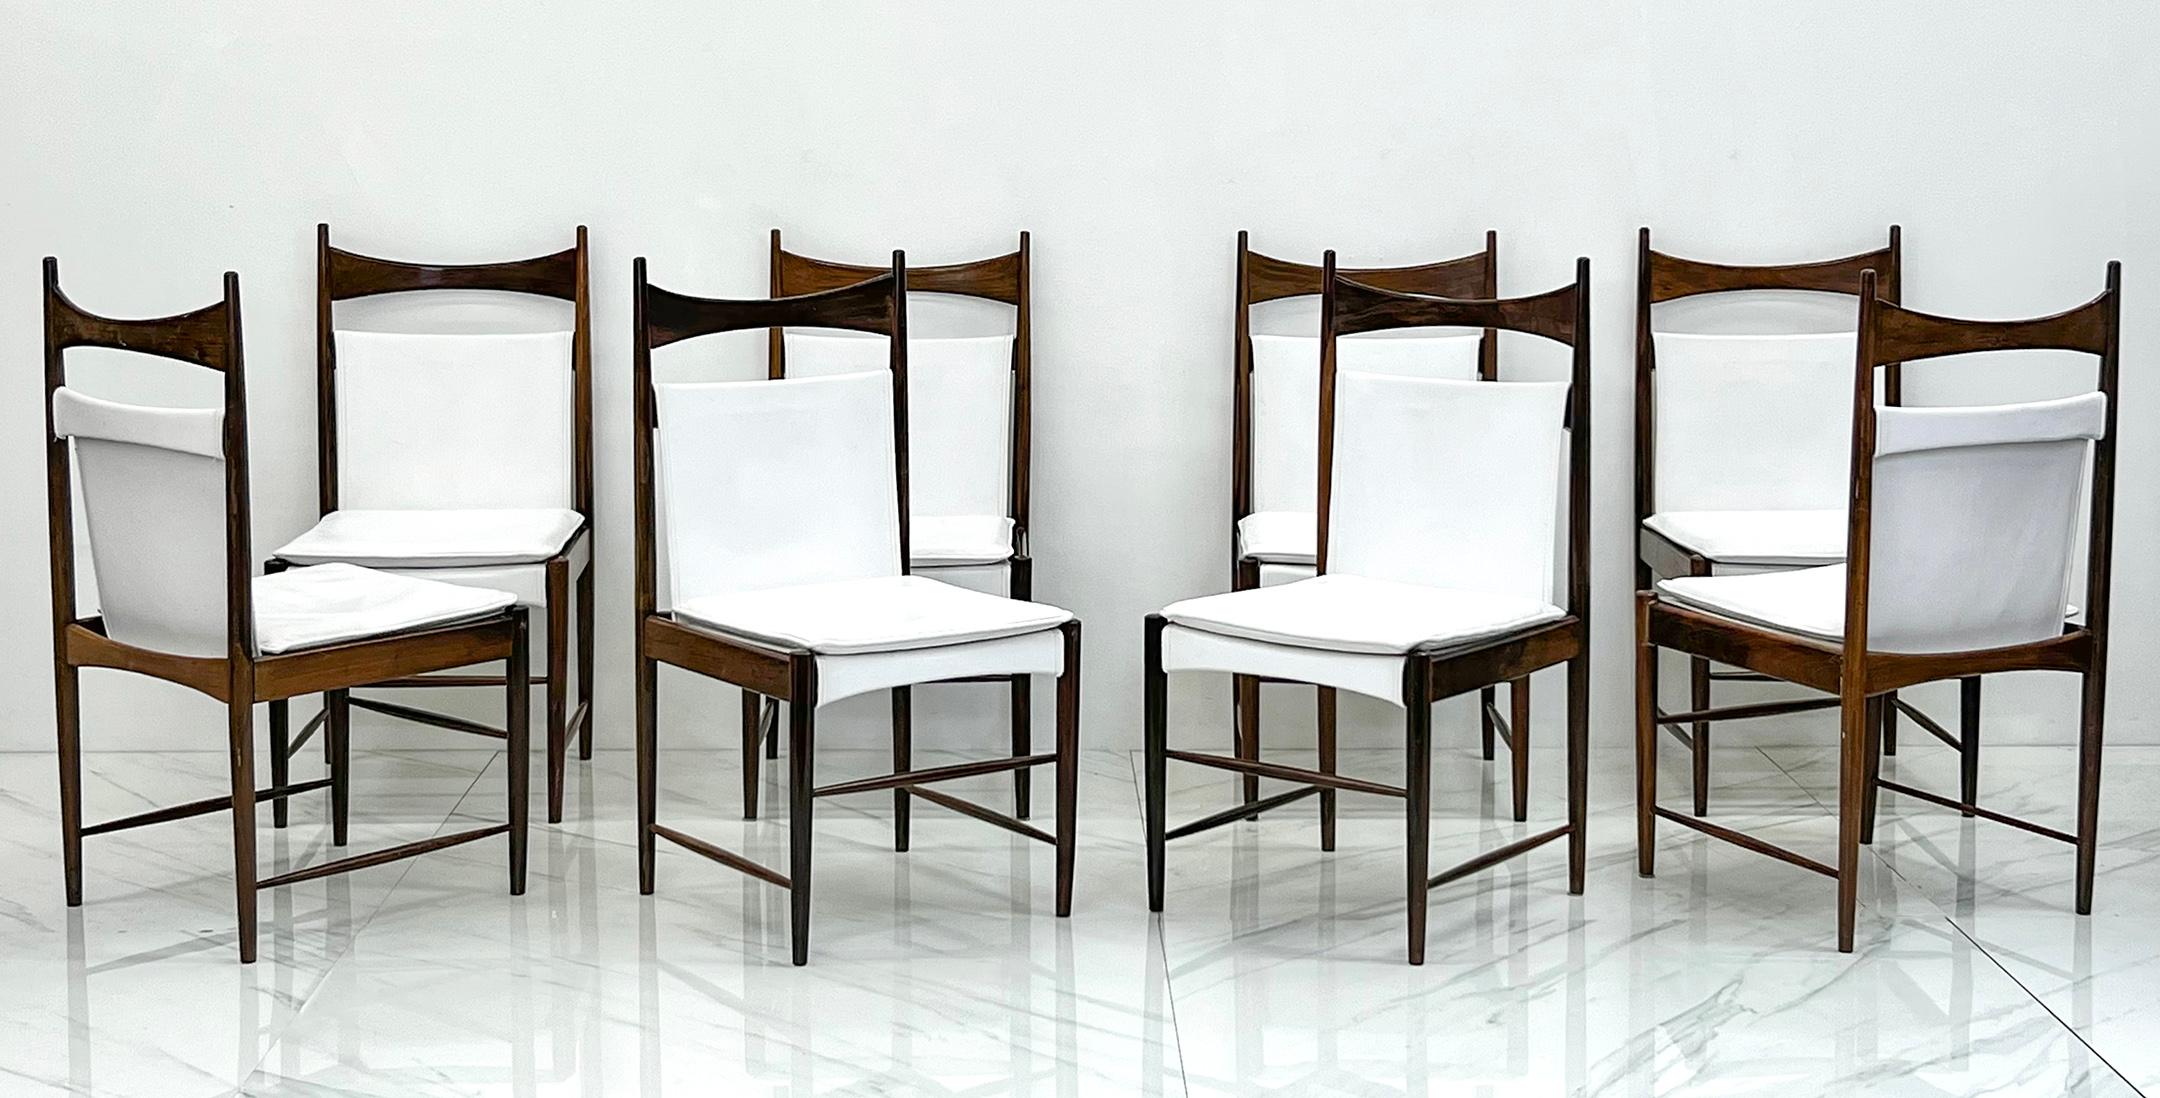 Faux Leather Set of 8 Rosewood Cantu Dining Chairs, Sergio Rodrigues, OCA Brazil, 1950's